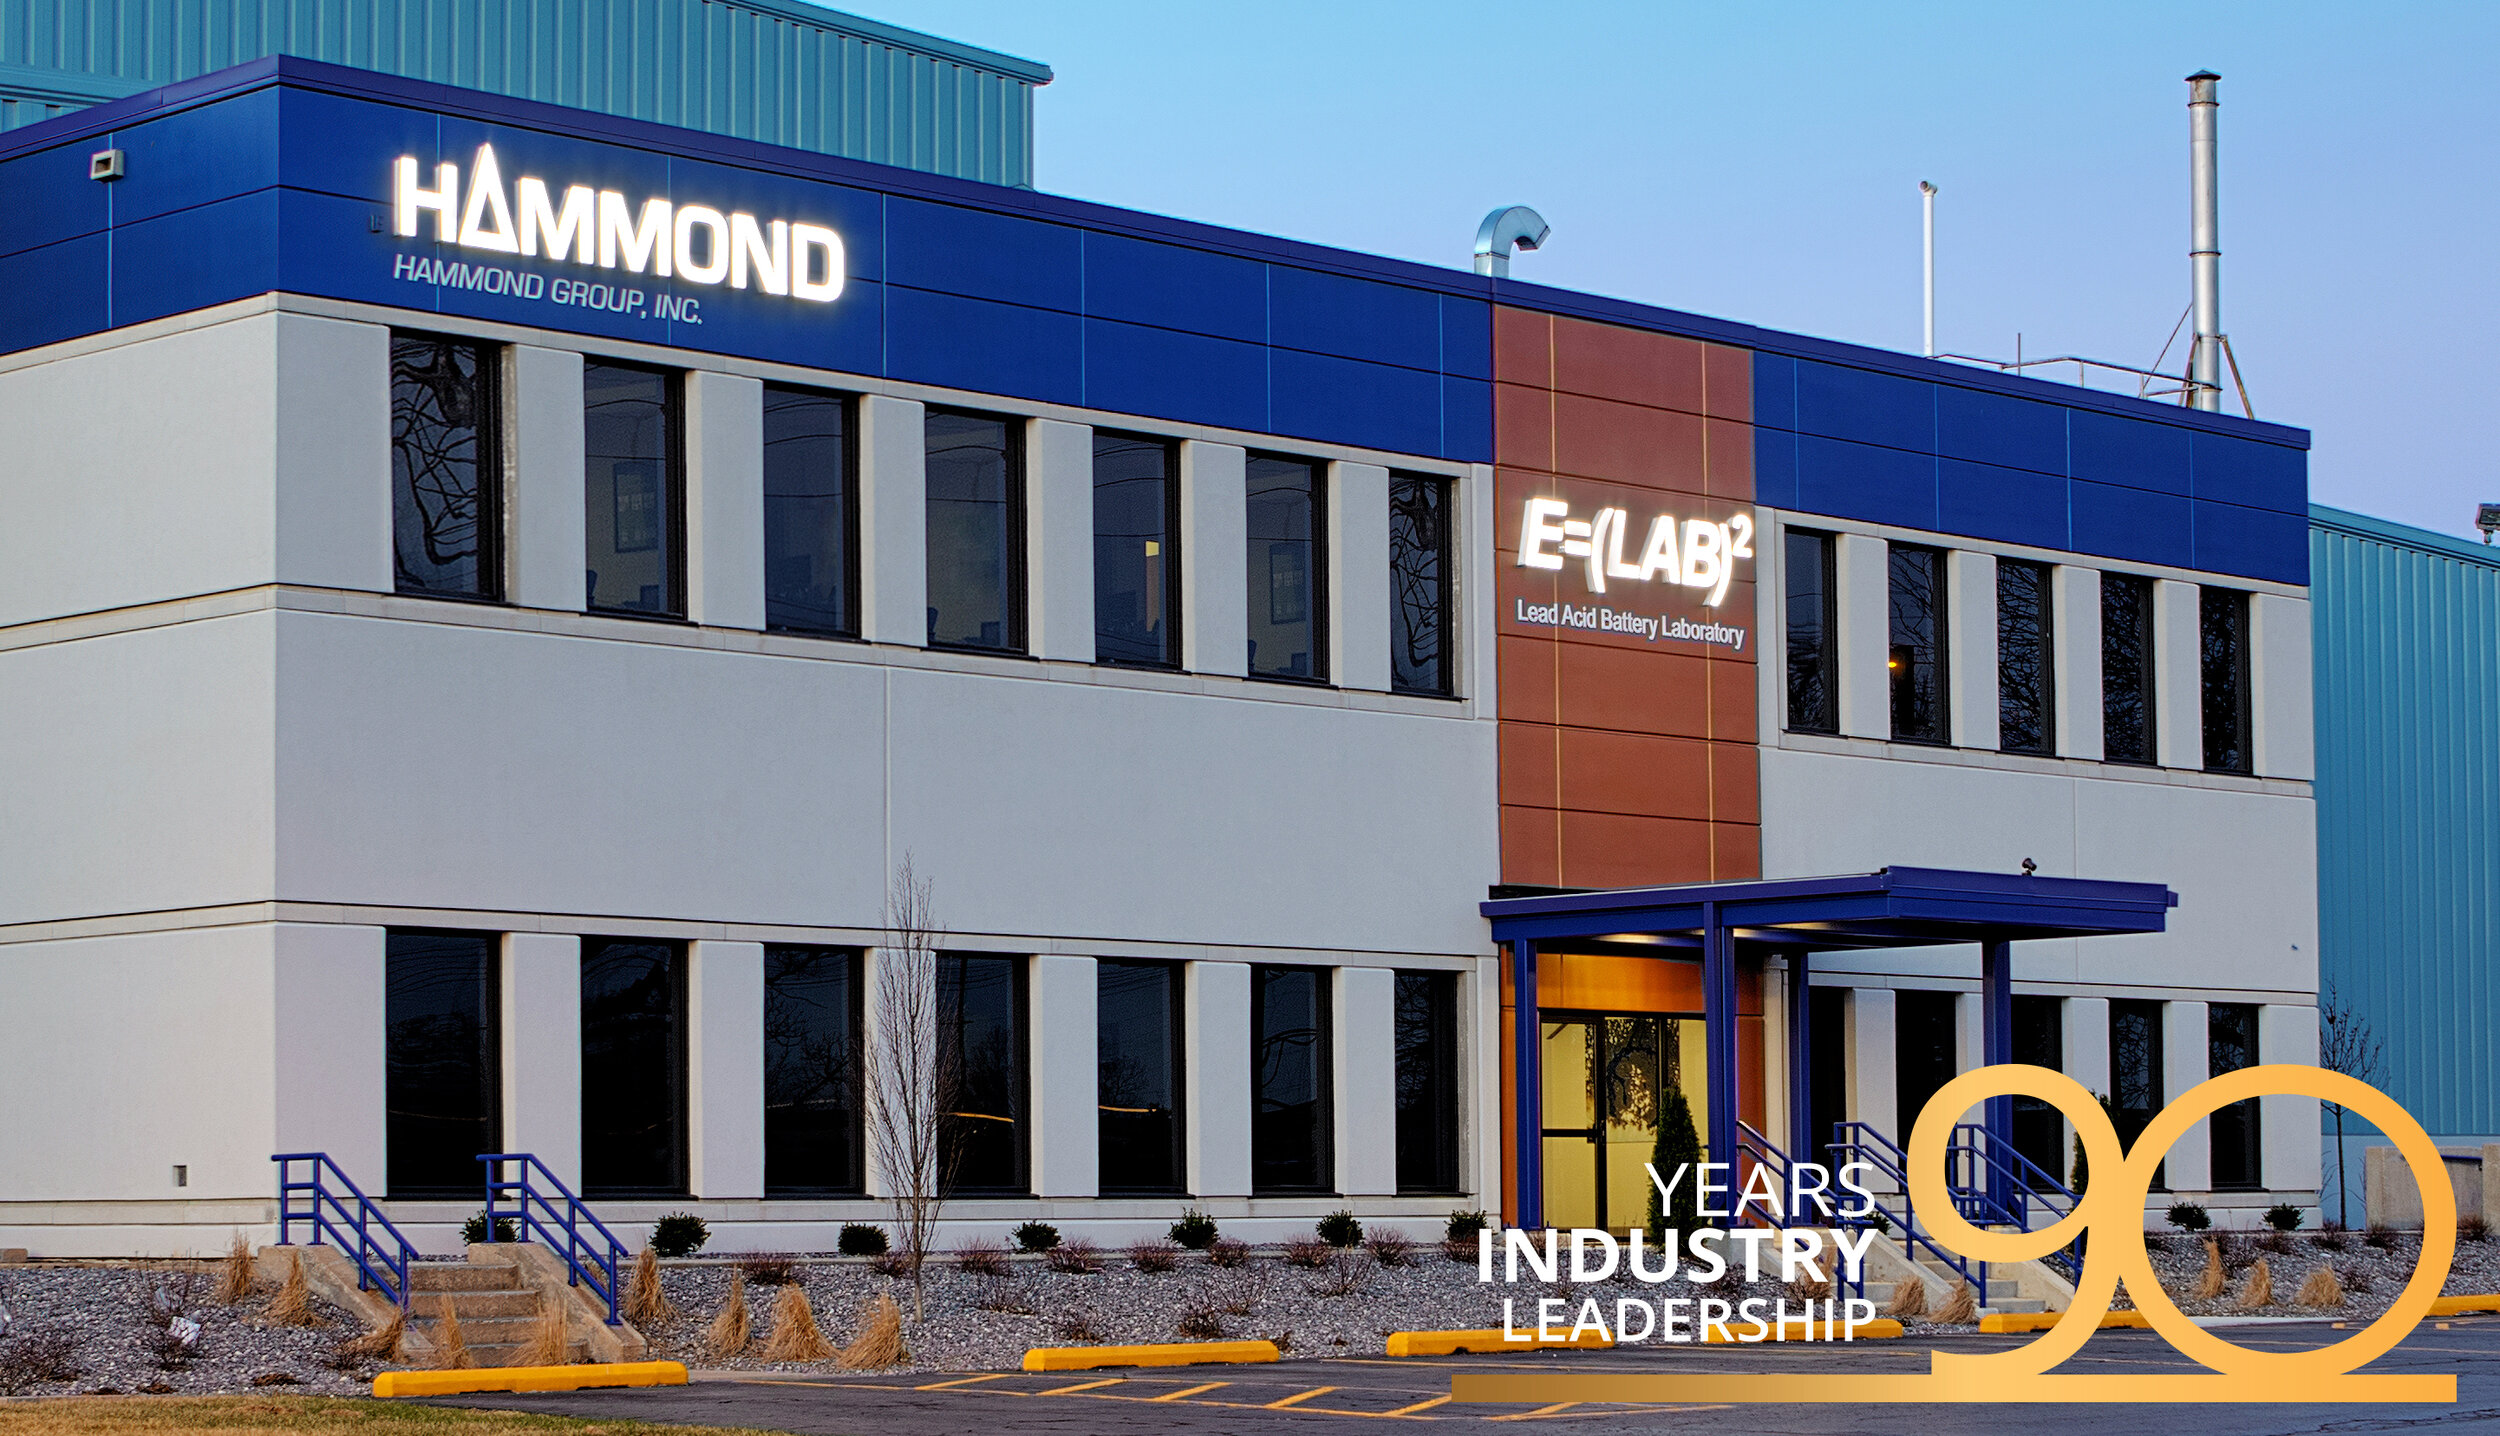 Hammond Group, Inc. is a specialty chemical company providing innovative materials for over 90 years.